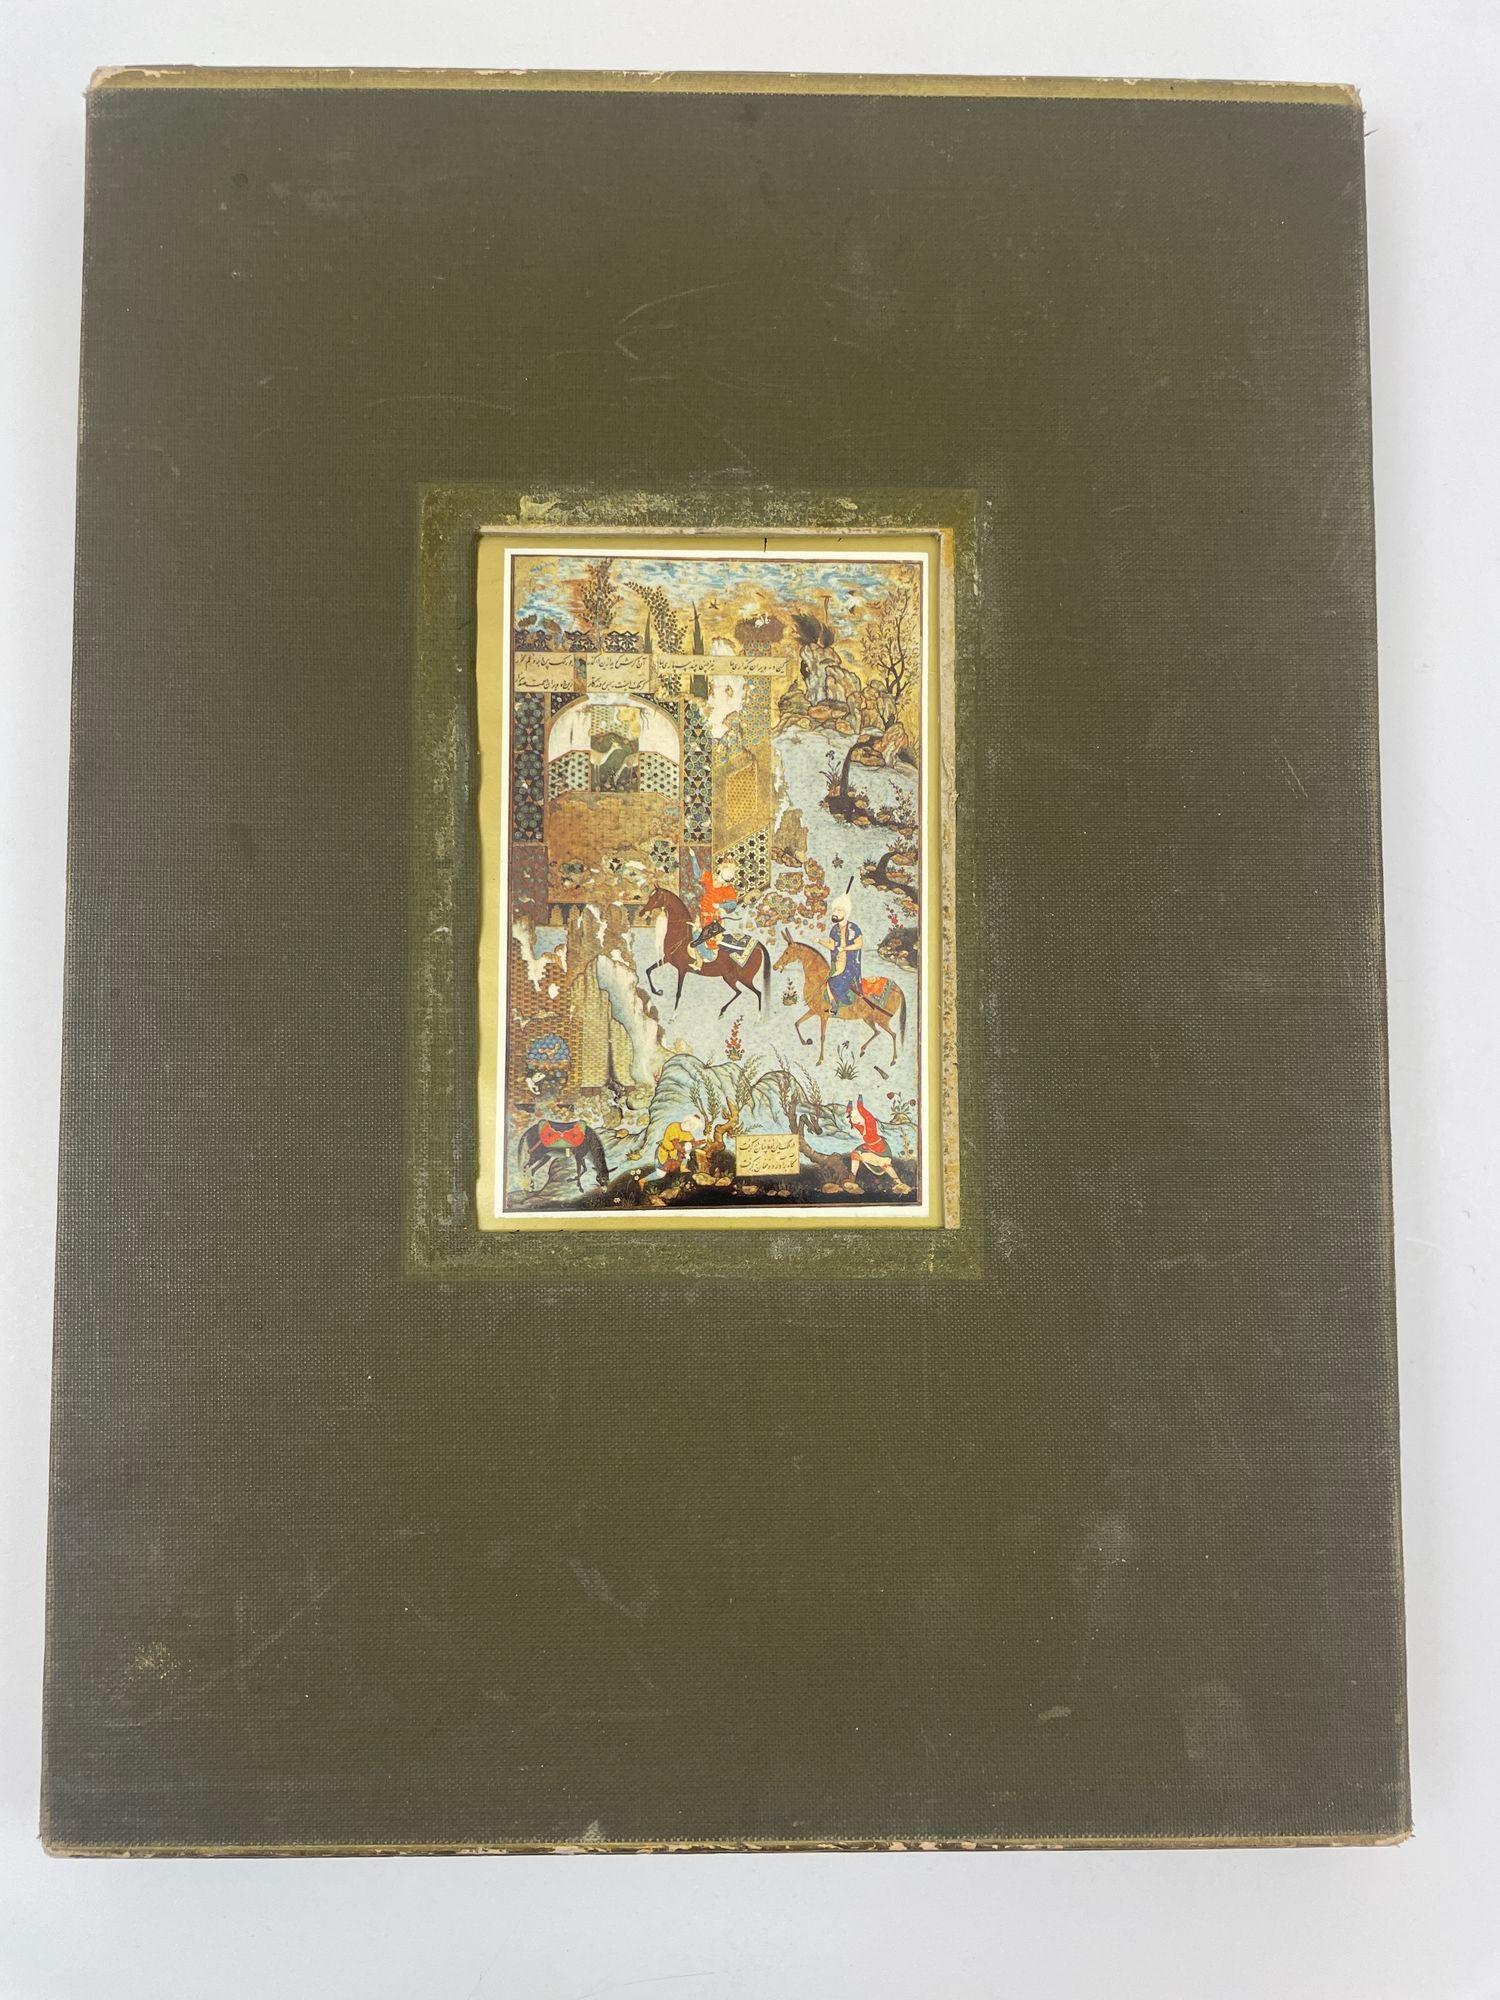 Islamic Persia The Immortal Kingdom by Ghirshman Minorsky Sanghvi 1971 For Sale